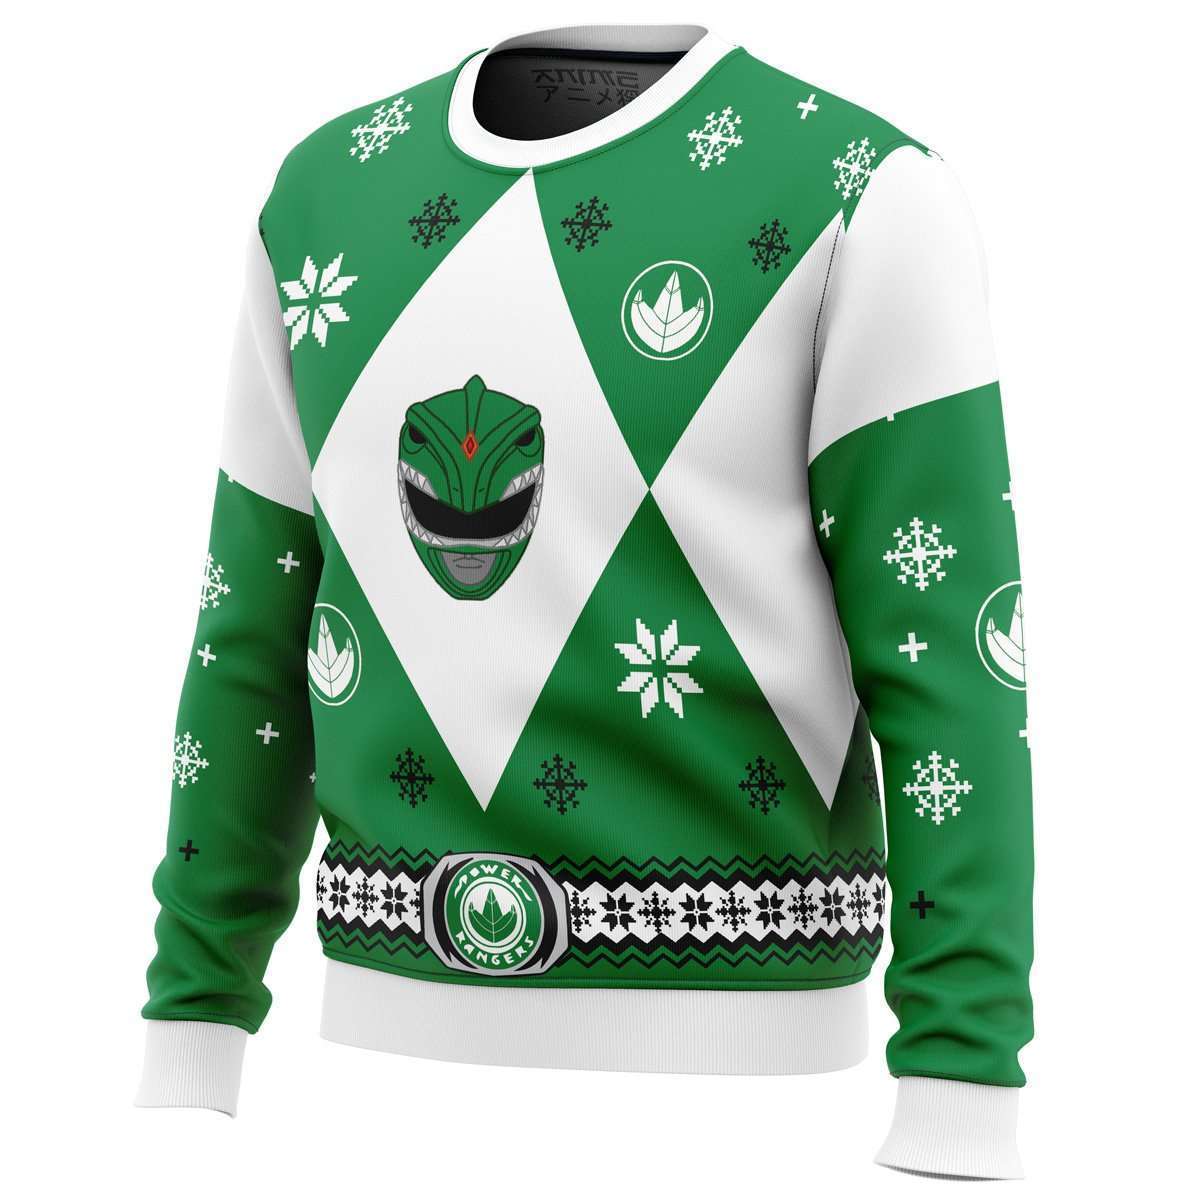 Mighty Morphin Power Rangers Green Ugly Christmas Sweater